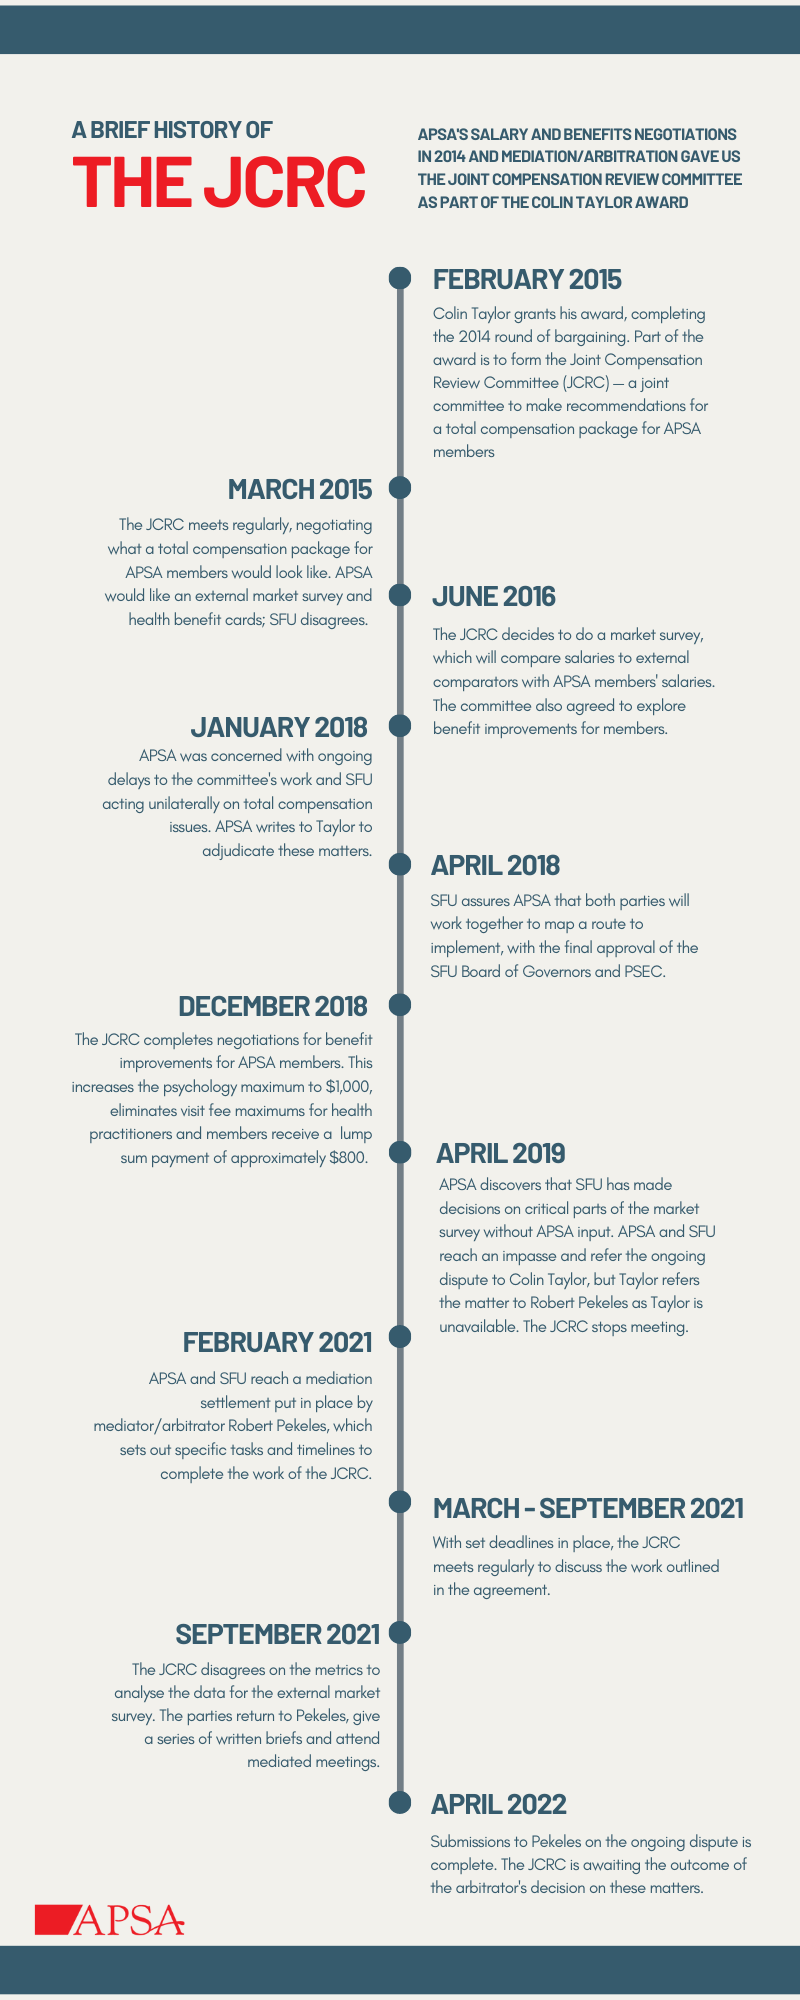 JCRC History Timeline Infographic